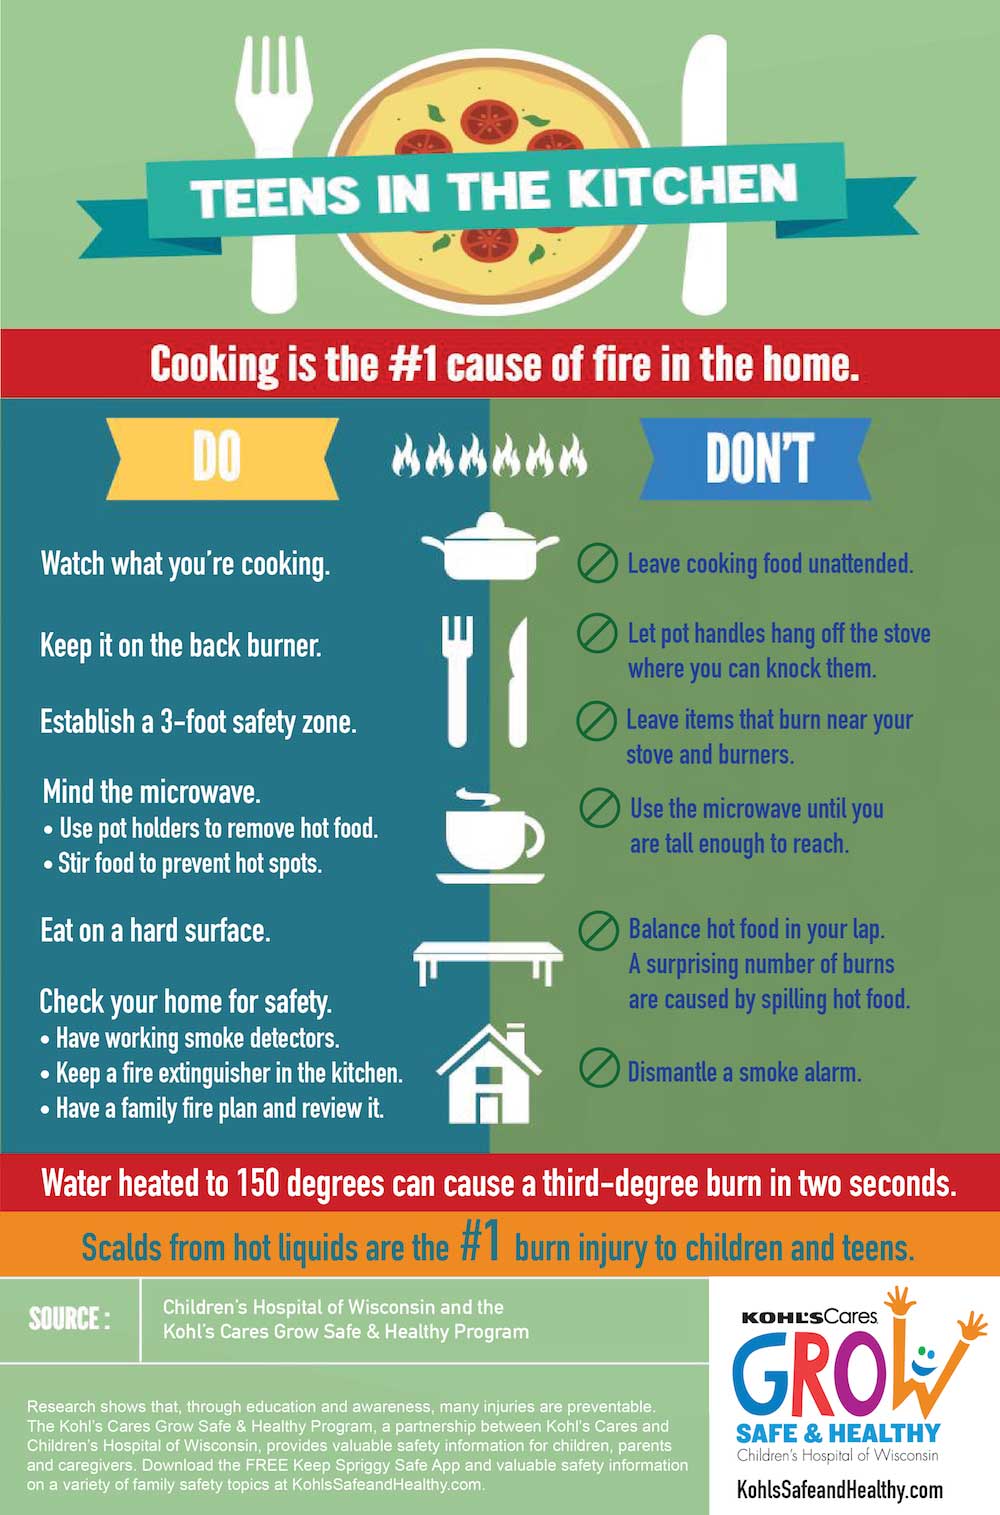 Top 10 Kitchen Safety Rules to Follow